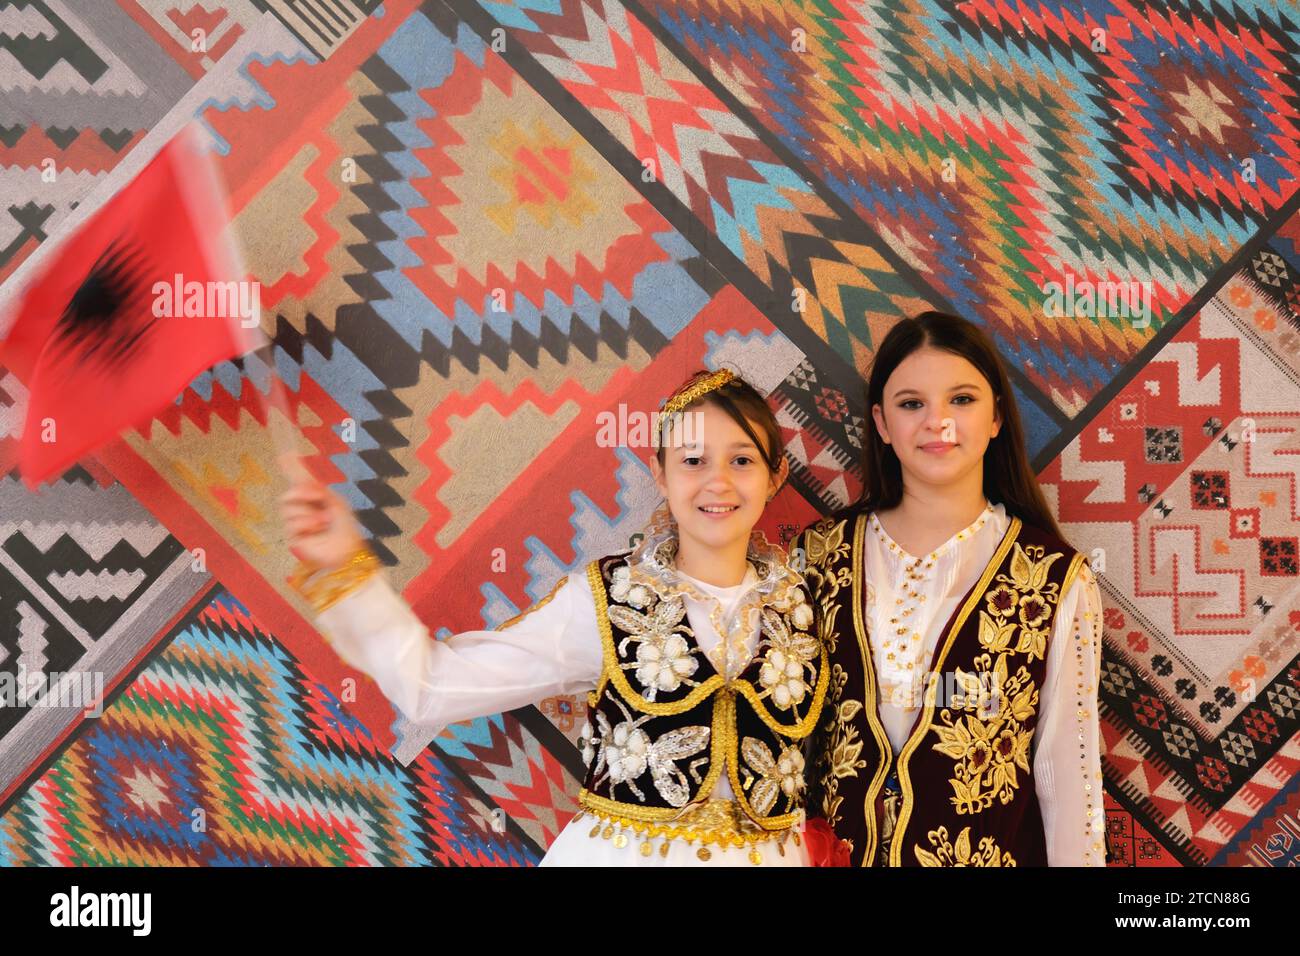 Tirana, Albania - November 28: Two girls with Albanian flags pose in front of traditional patterns at Palace of Congresses during Independence Day Stock Photo